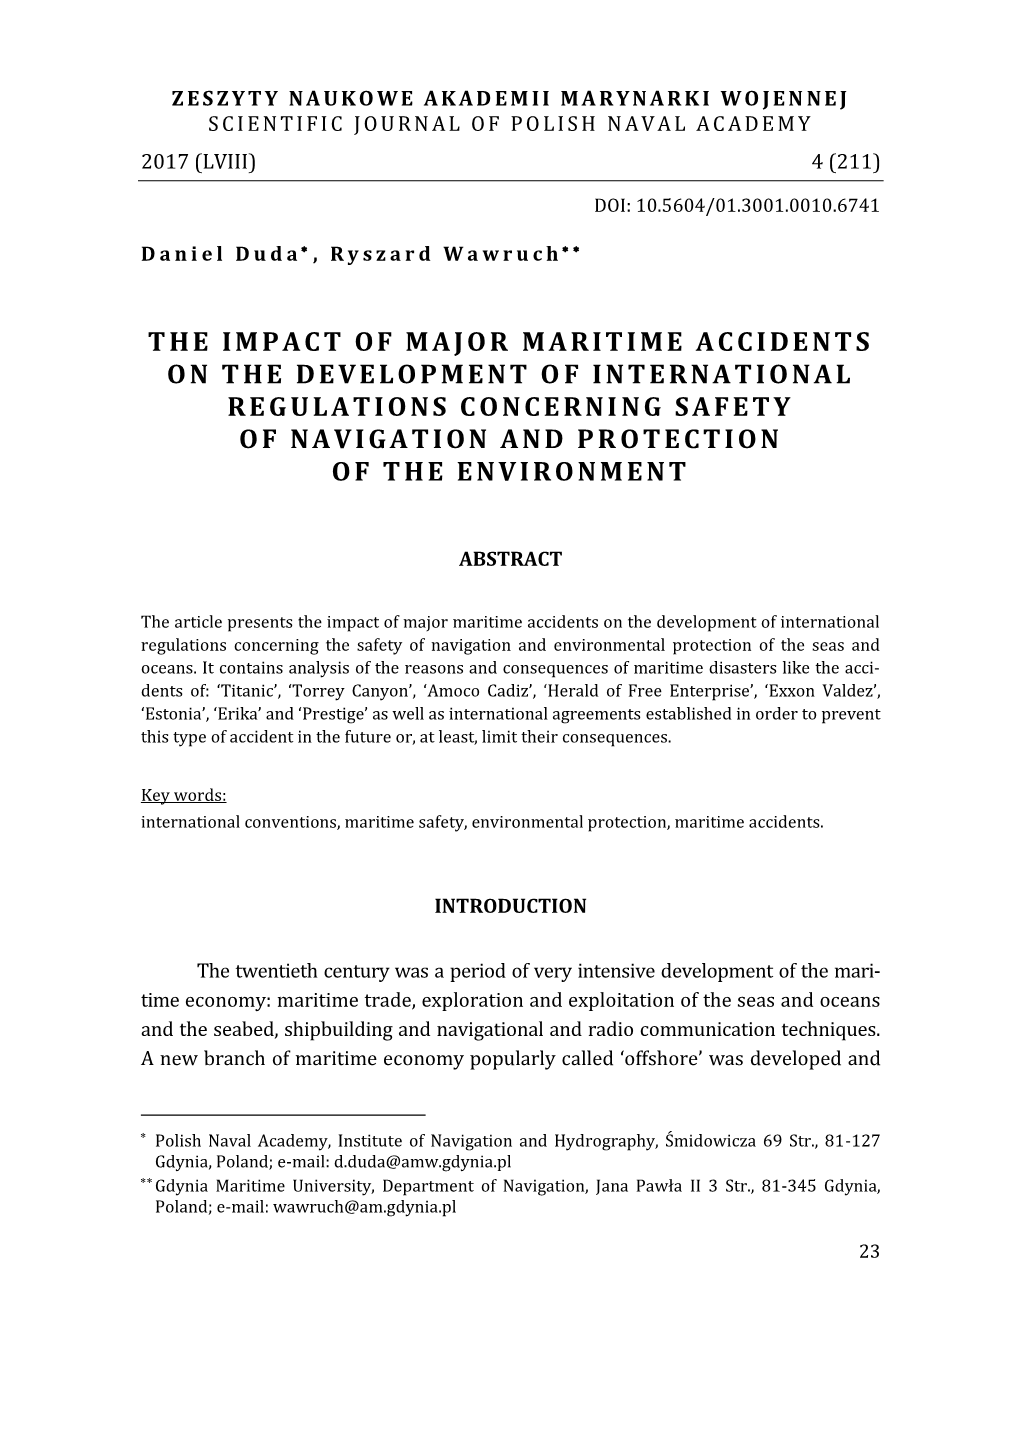 The Impact of Major Maritime Accidents on the Development O F International Regulations Concerni Ng Safe Ty of Navigation and Pr Ote Ction of the Environment